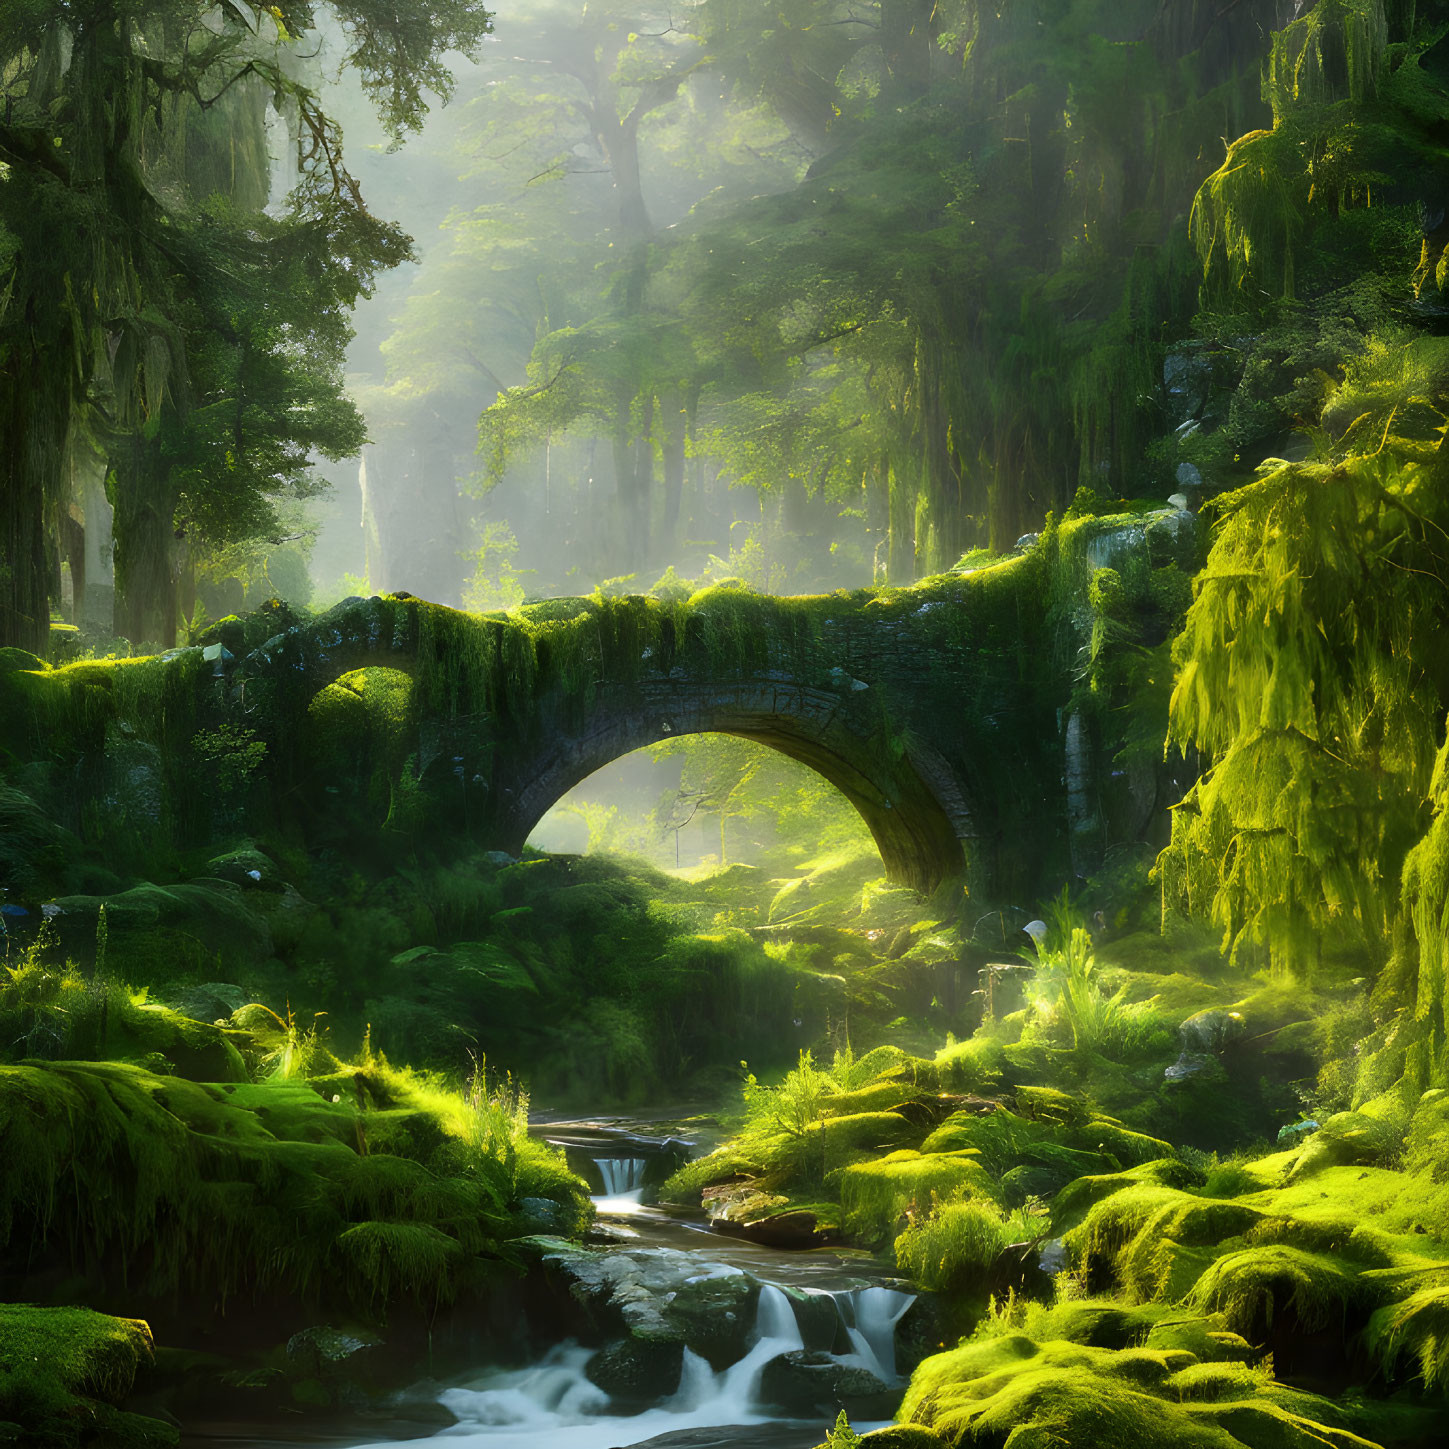 Moss-covered stone bridge over stream in sunlit forest with fog